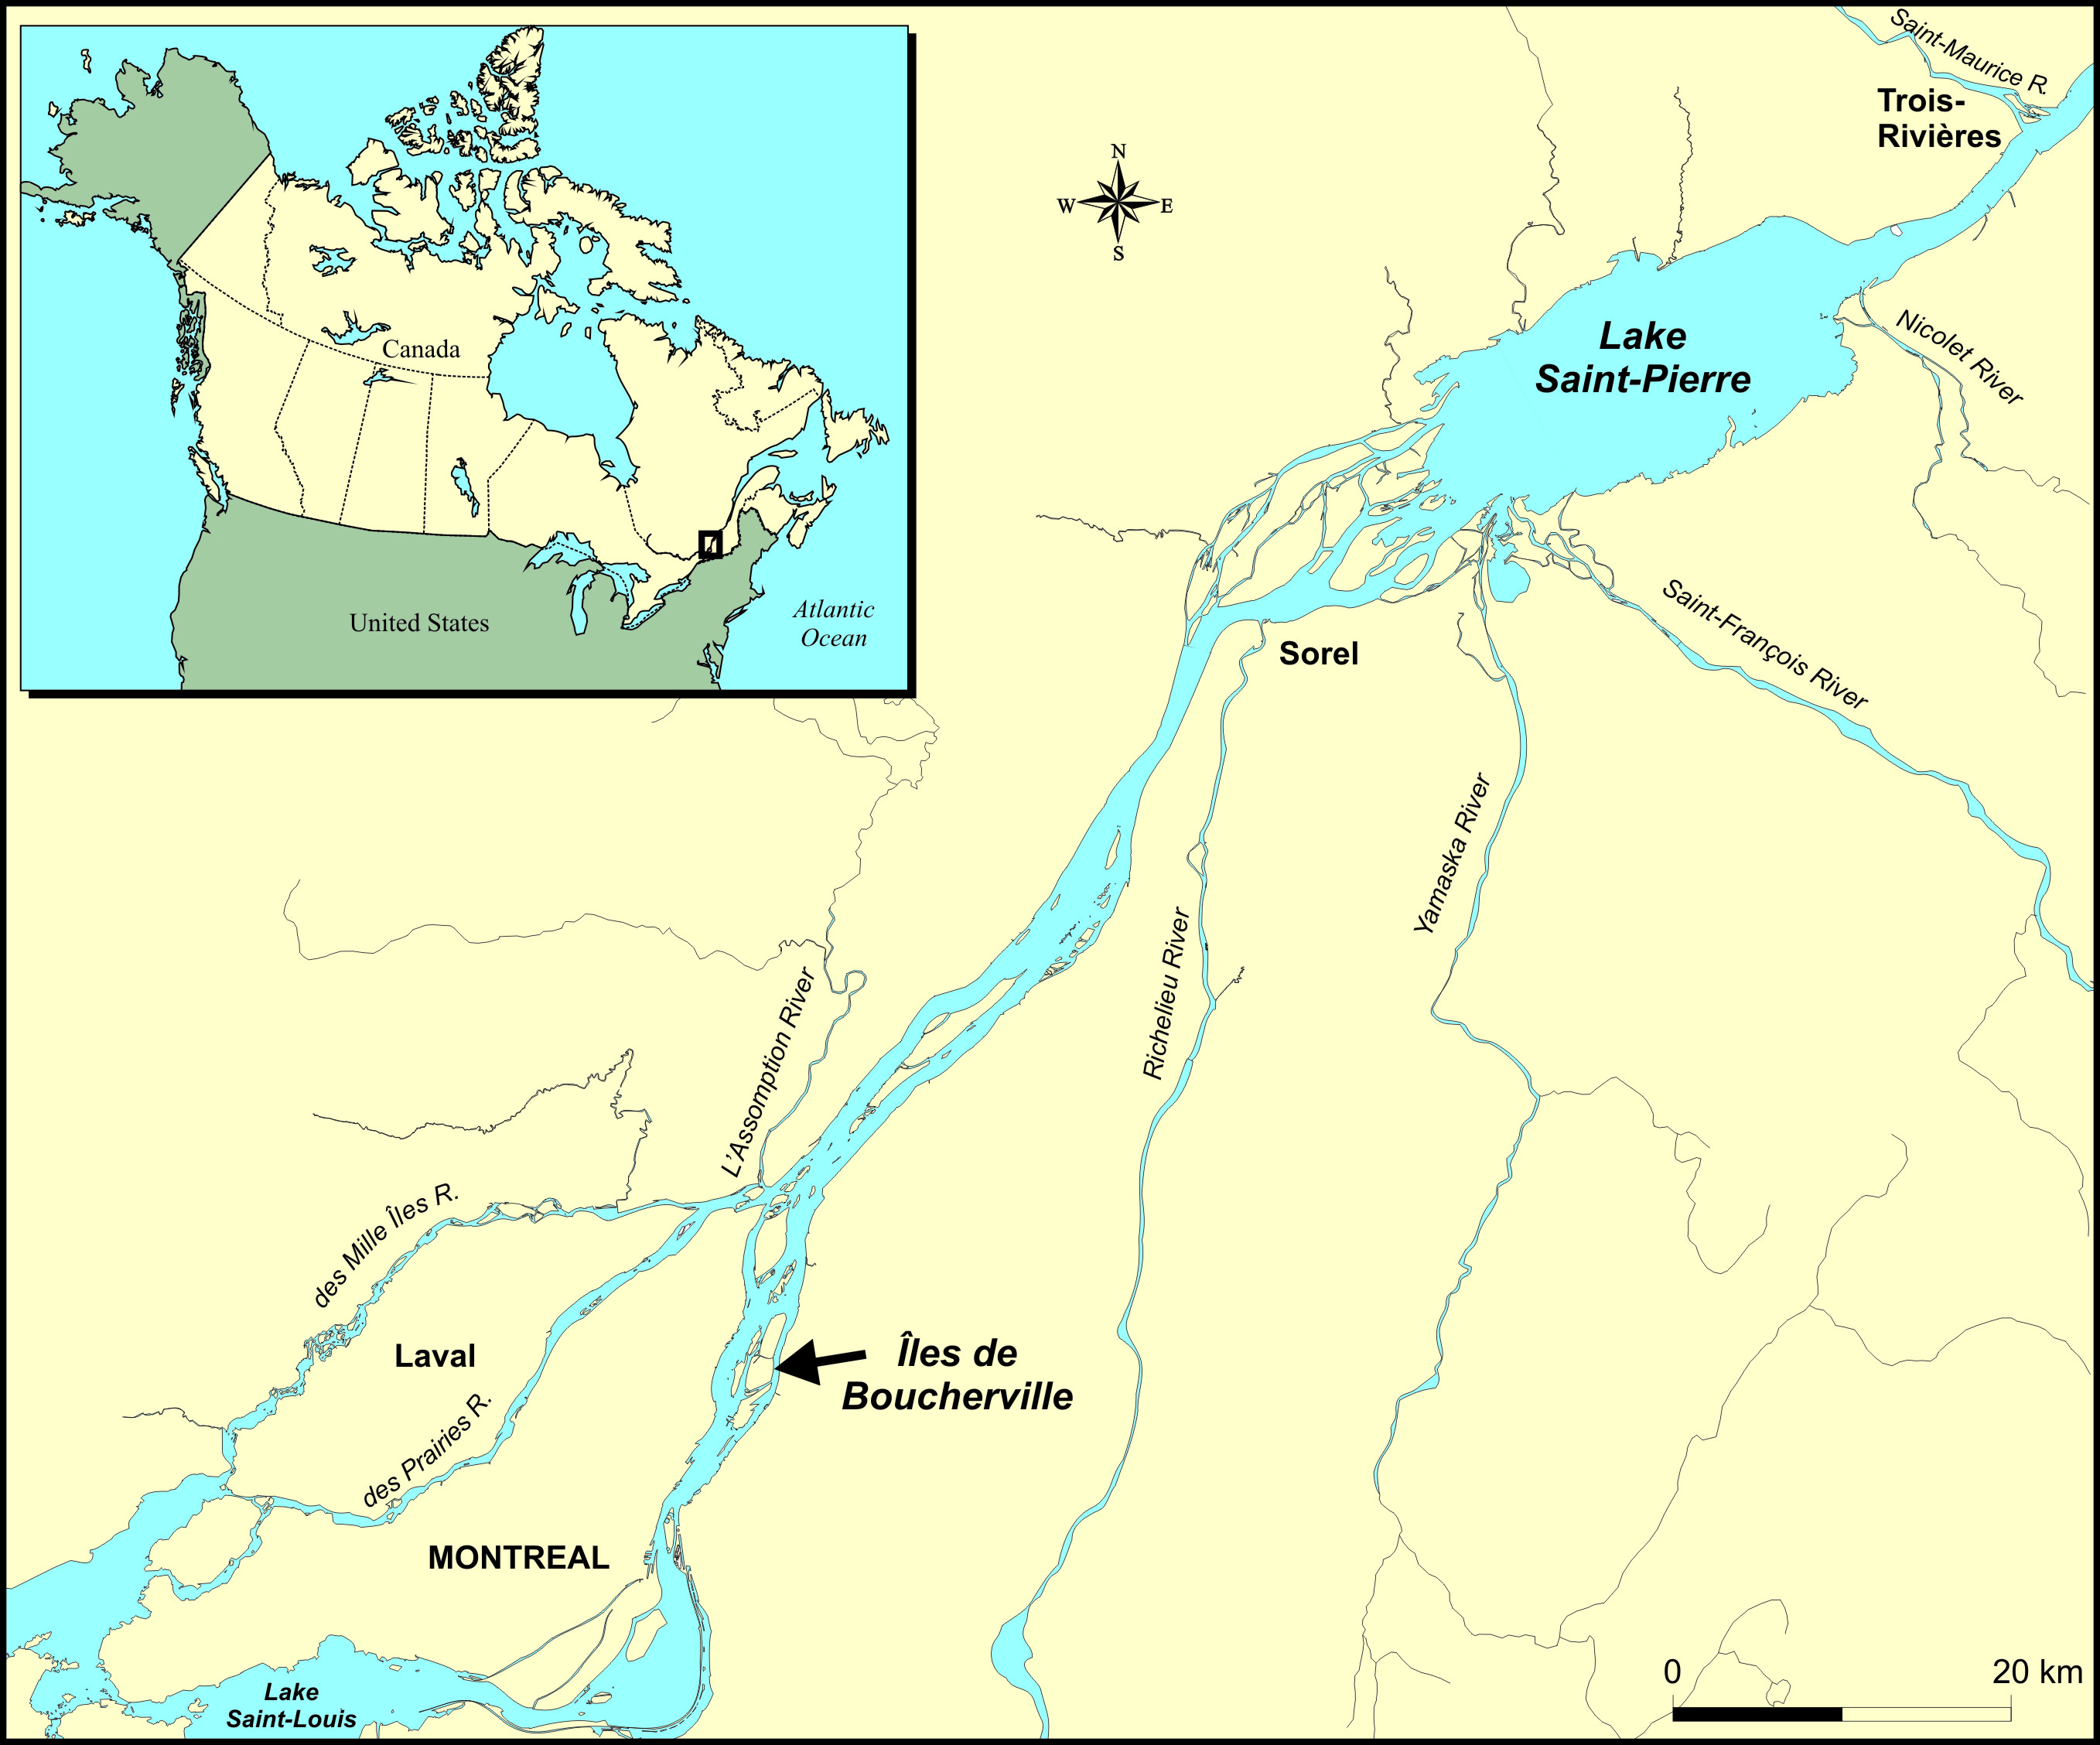 Map illustrating Canada and United States in mortise with a zoom on the fluvial sector of the St. Lawrence River between Montreal and Trois-Rivières including the Boucherville Islands